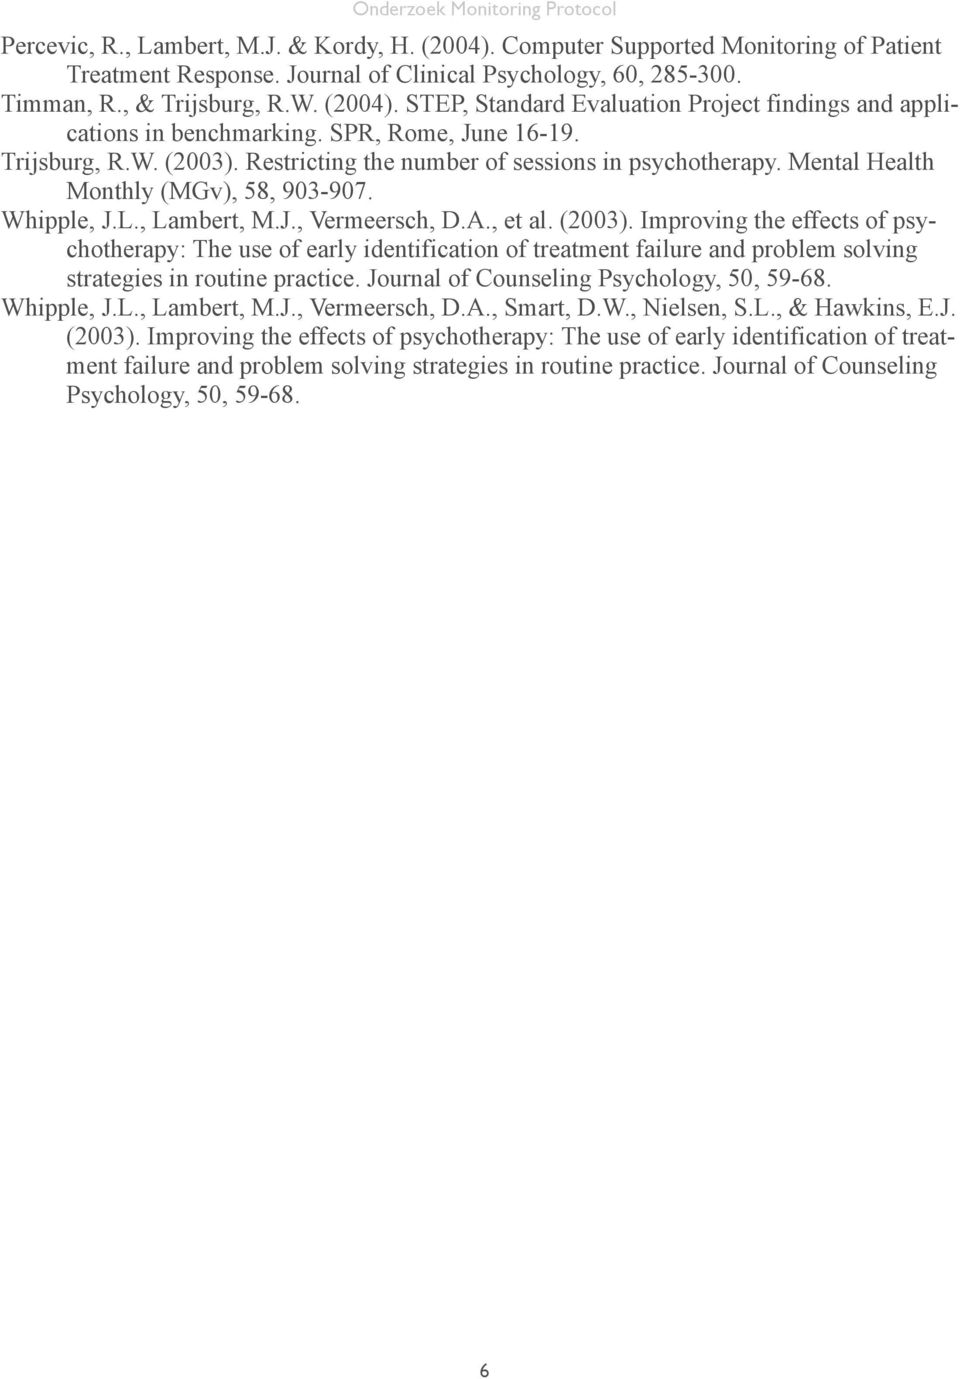 (2003). Improving the effects of psychotherapy: The use of early identification of treatment failure and problem solving strategies in routine practice. Journal of Counseling Psychology, 50, 59-68.